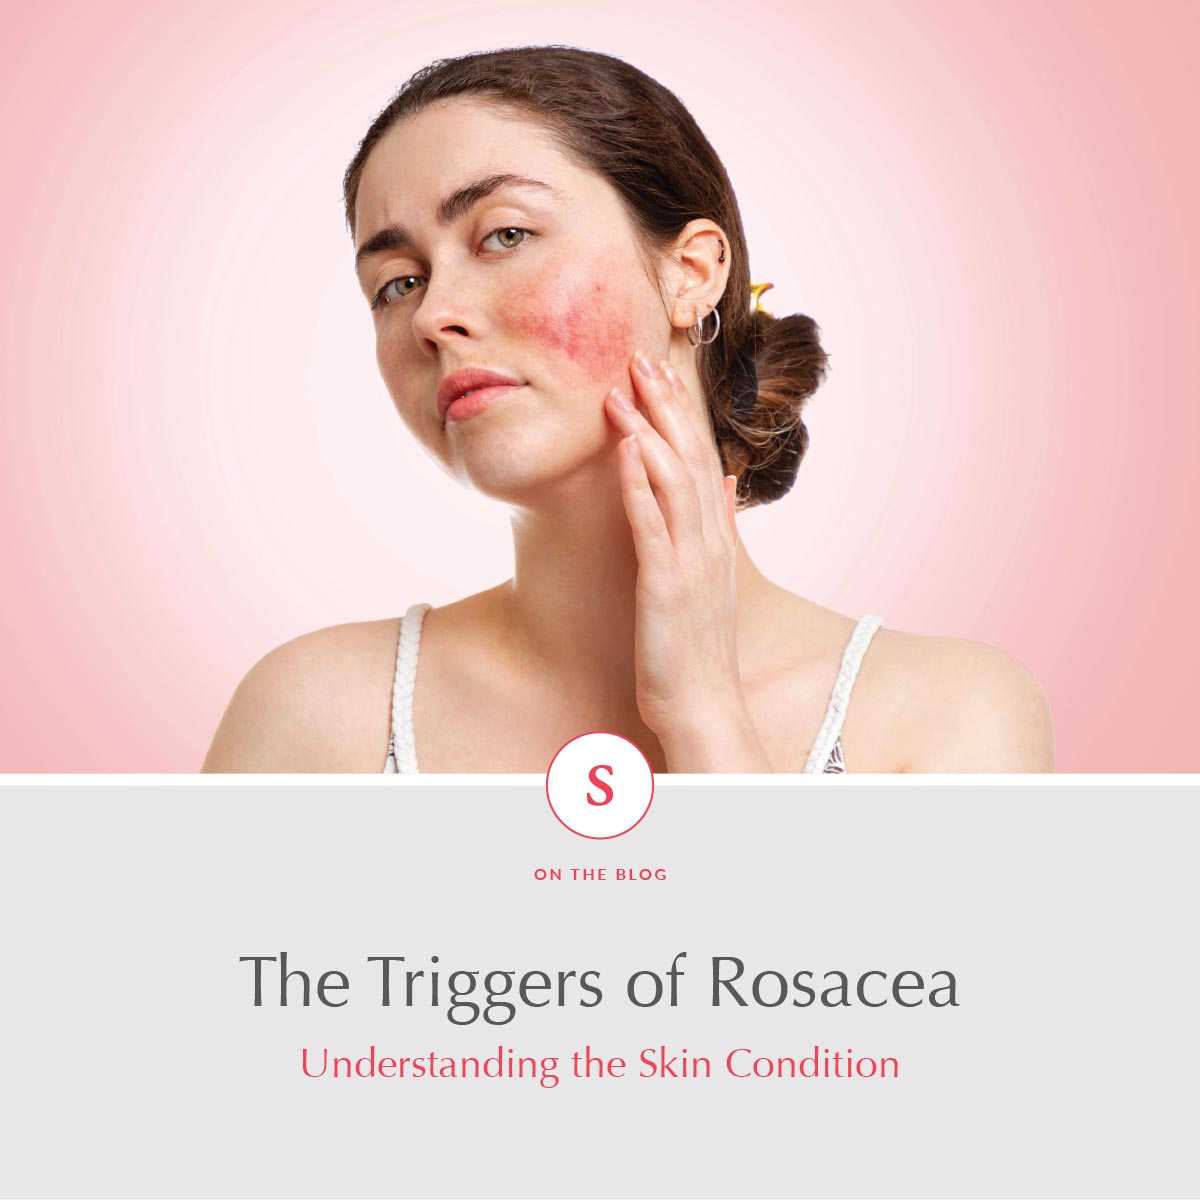 The Triggers of Rosacea: Understanding the Skin Condition